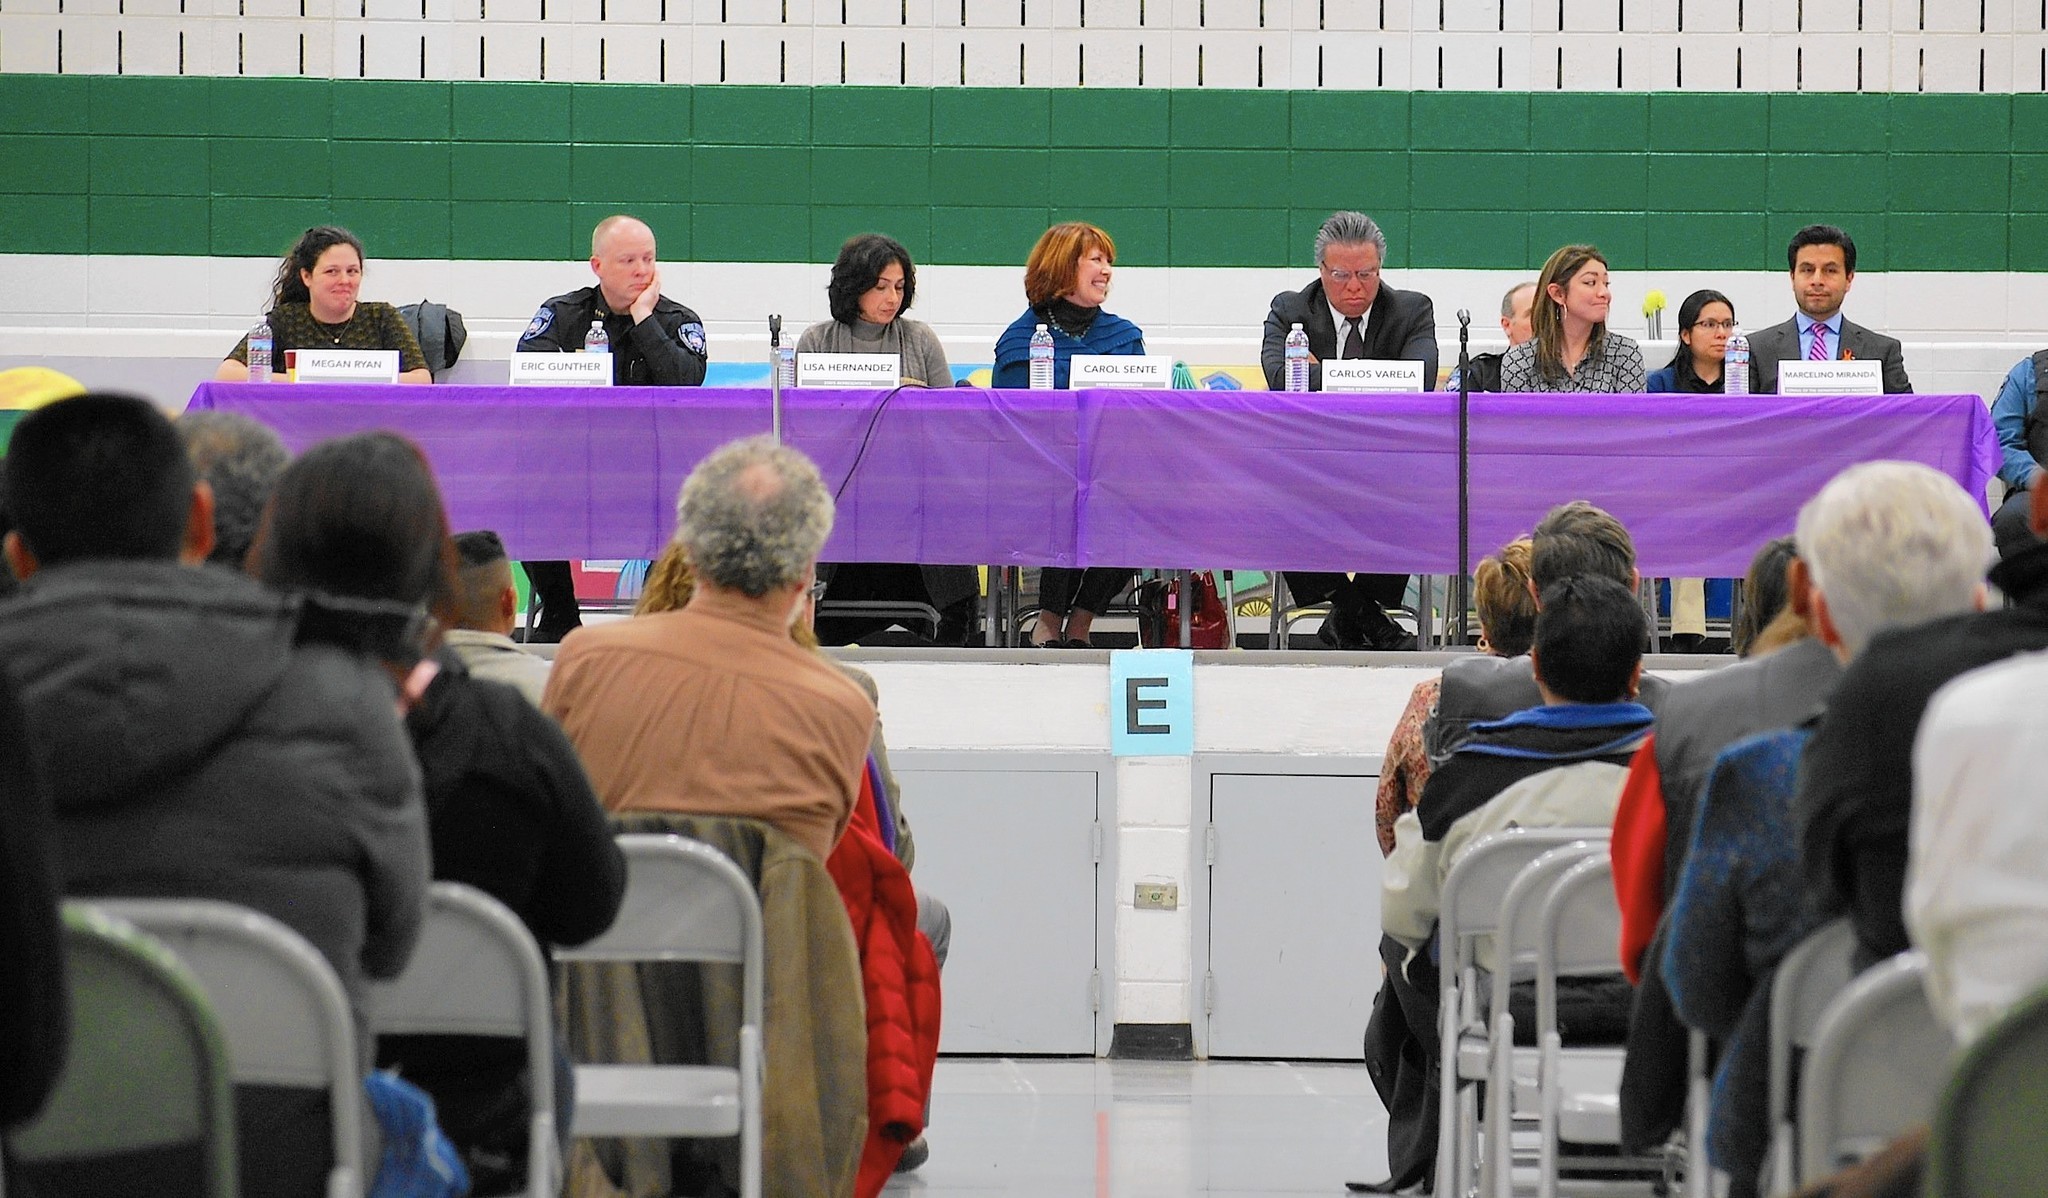 Mundelein school leaders assemble immigration panel to deal with students' concerns